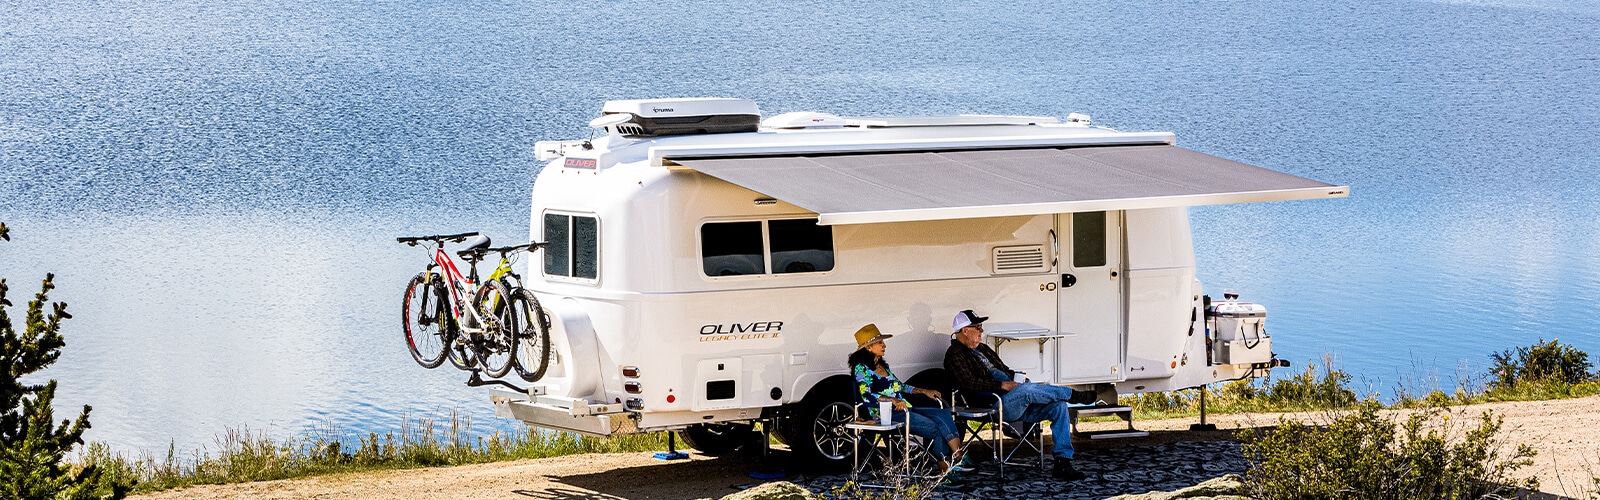 Both the travel trailer and fifth wheel offer similar amenities such as kitchens, bathrooms, sleeping areas, and living spaces.